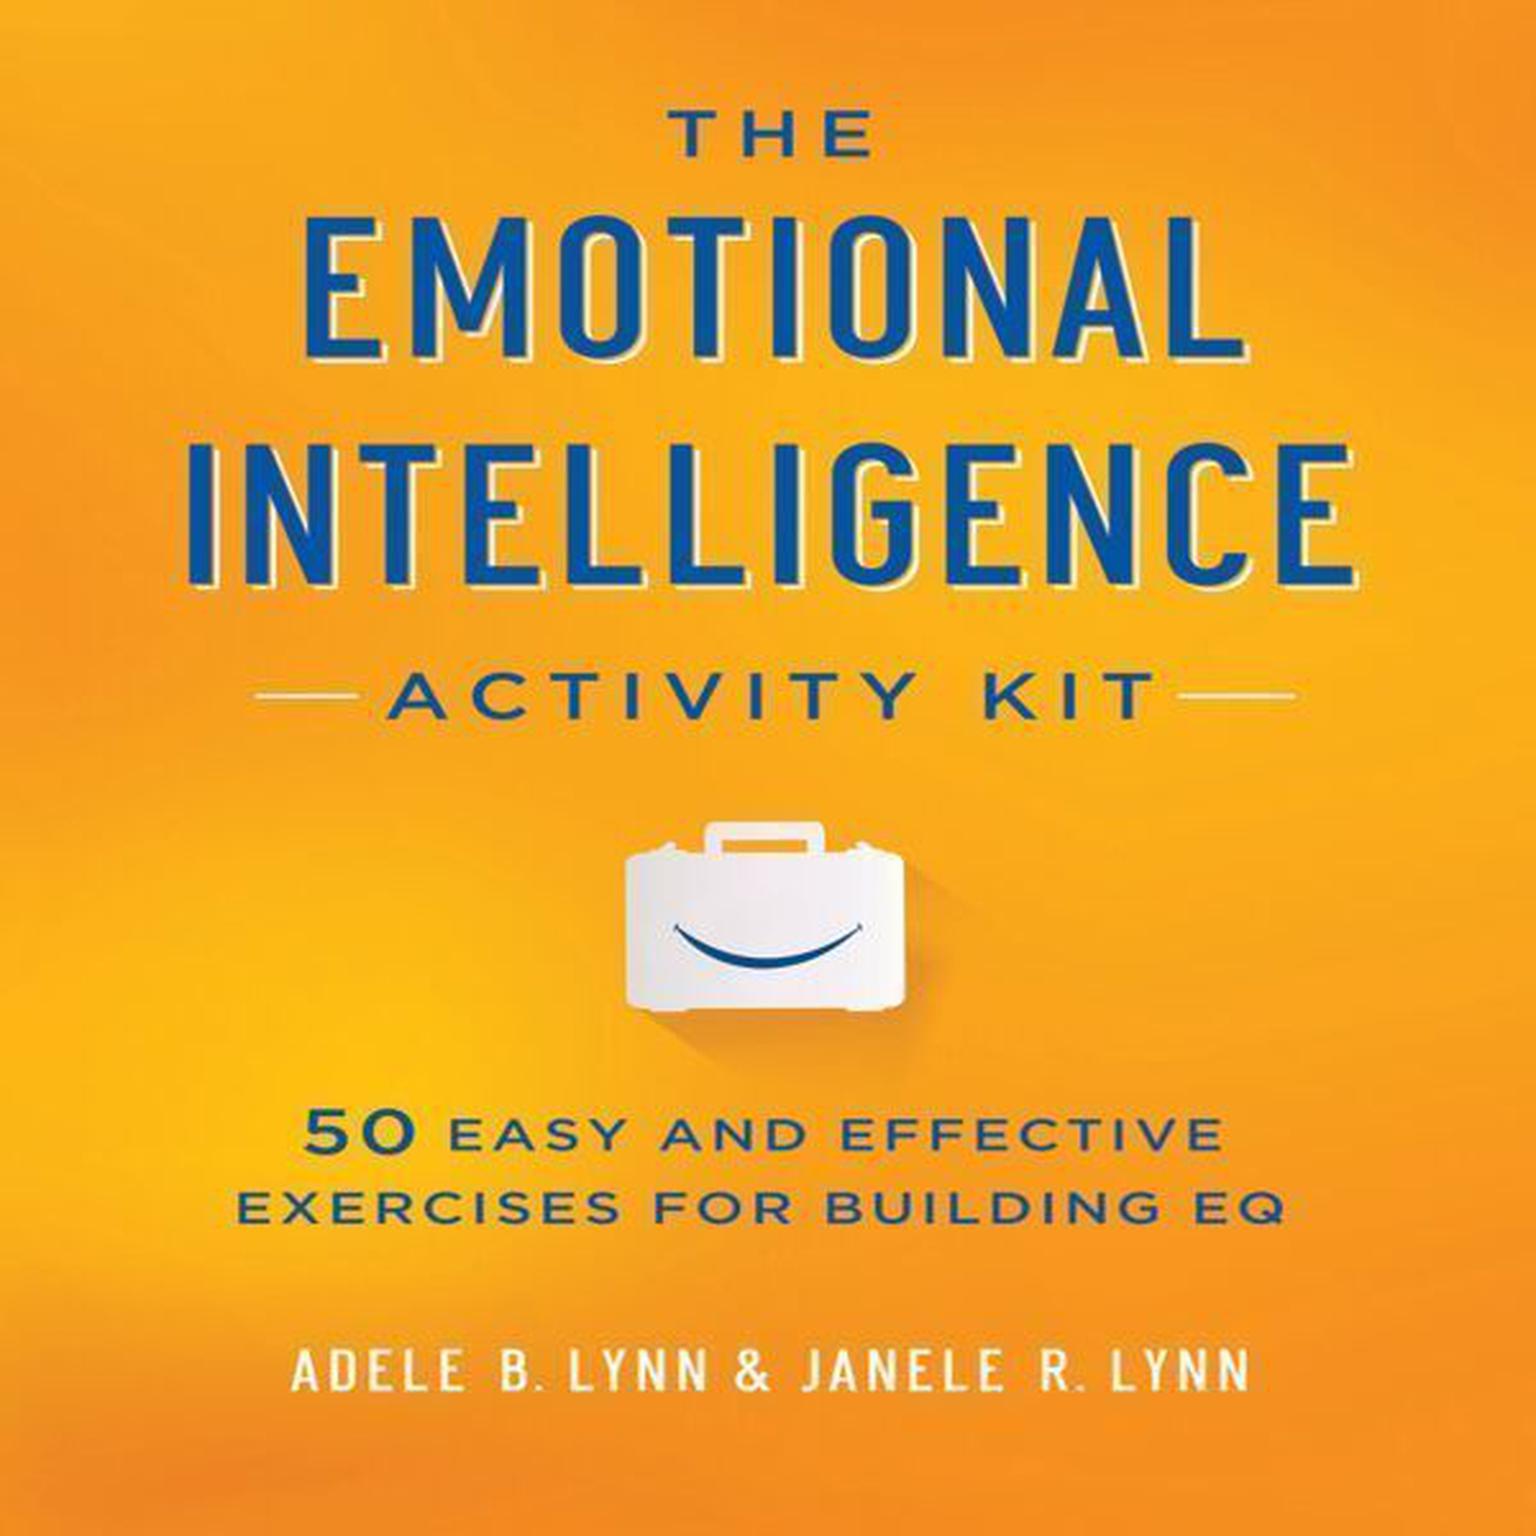 The Emotional Intelligence Activity Kit: 50 Easy and Effective Exercises for Building EQ Audiobook, by Adele B. Lynn